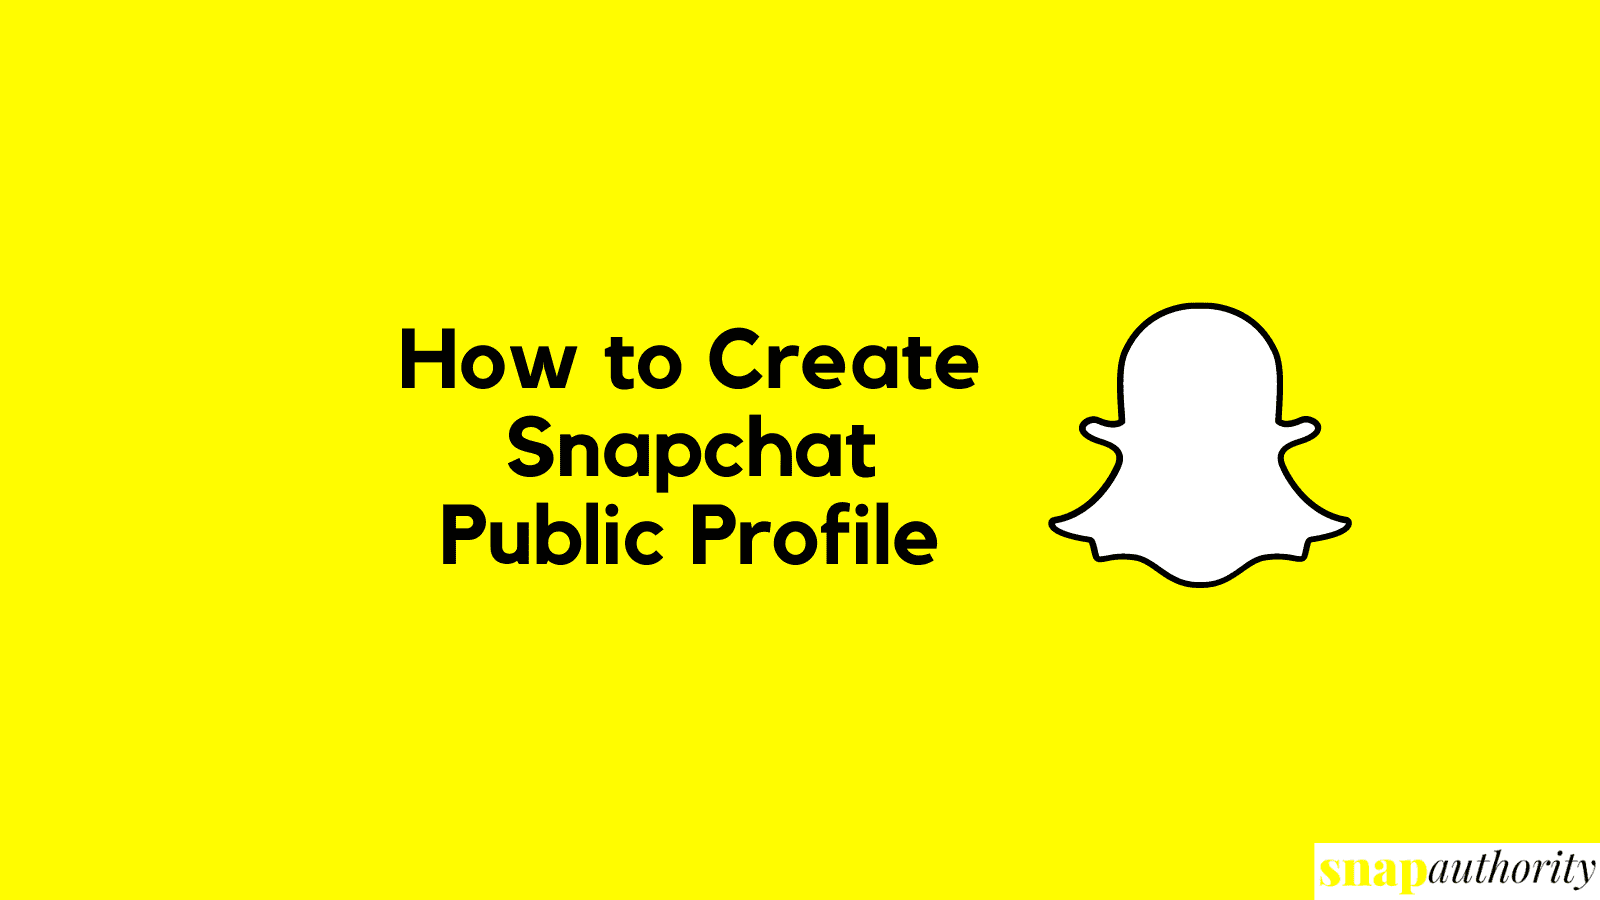 How to create public profile on Snapchat